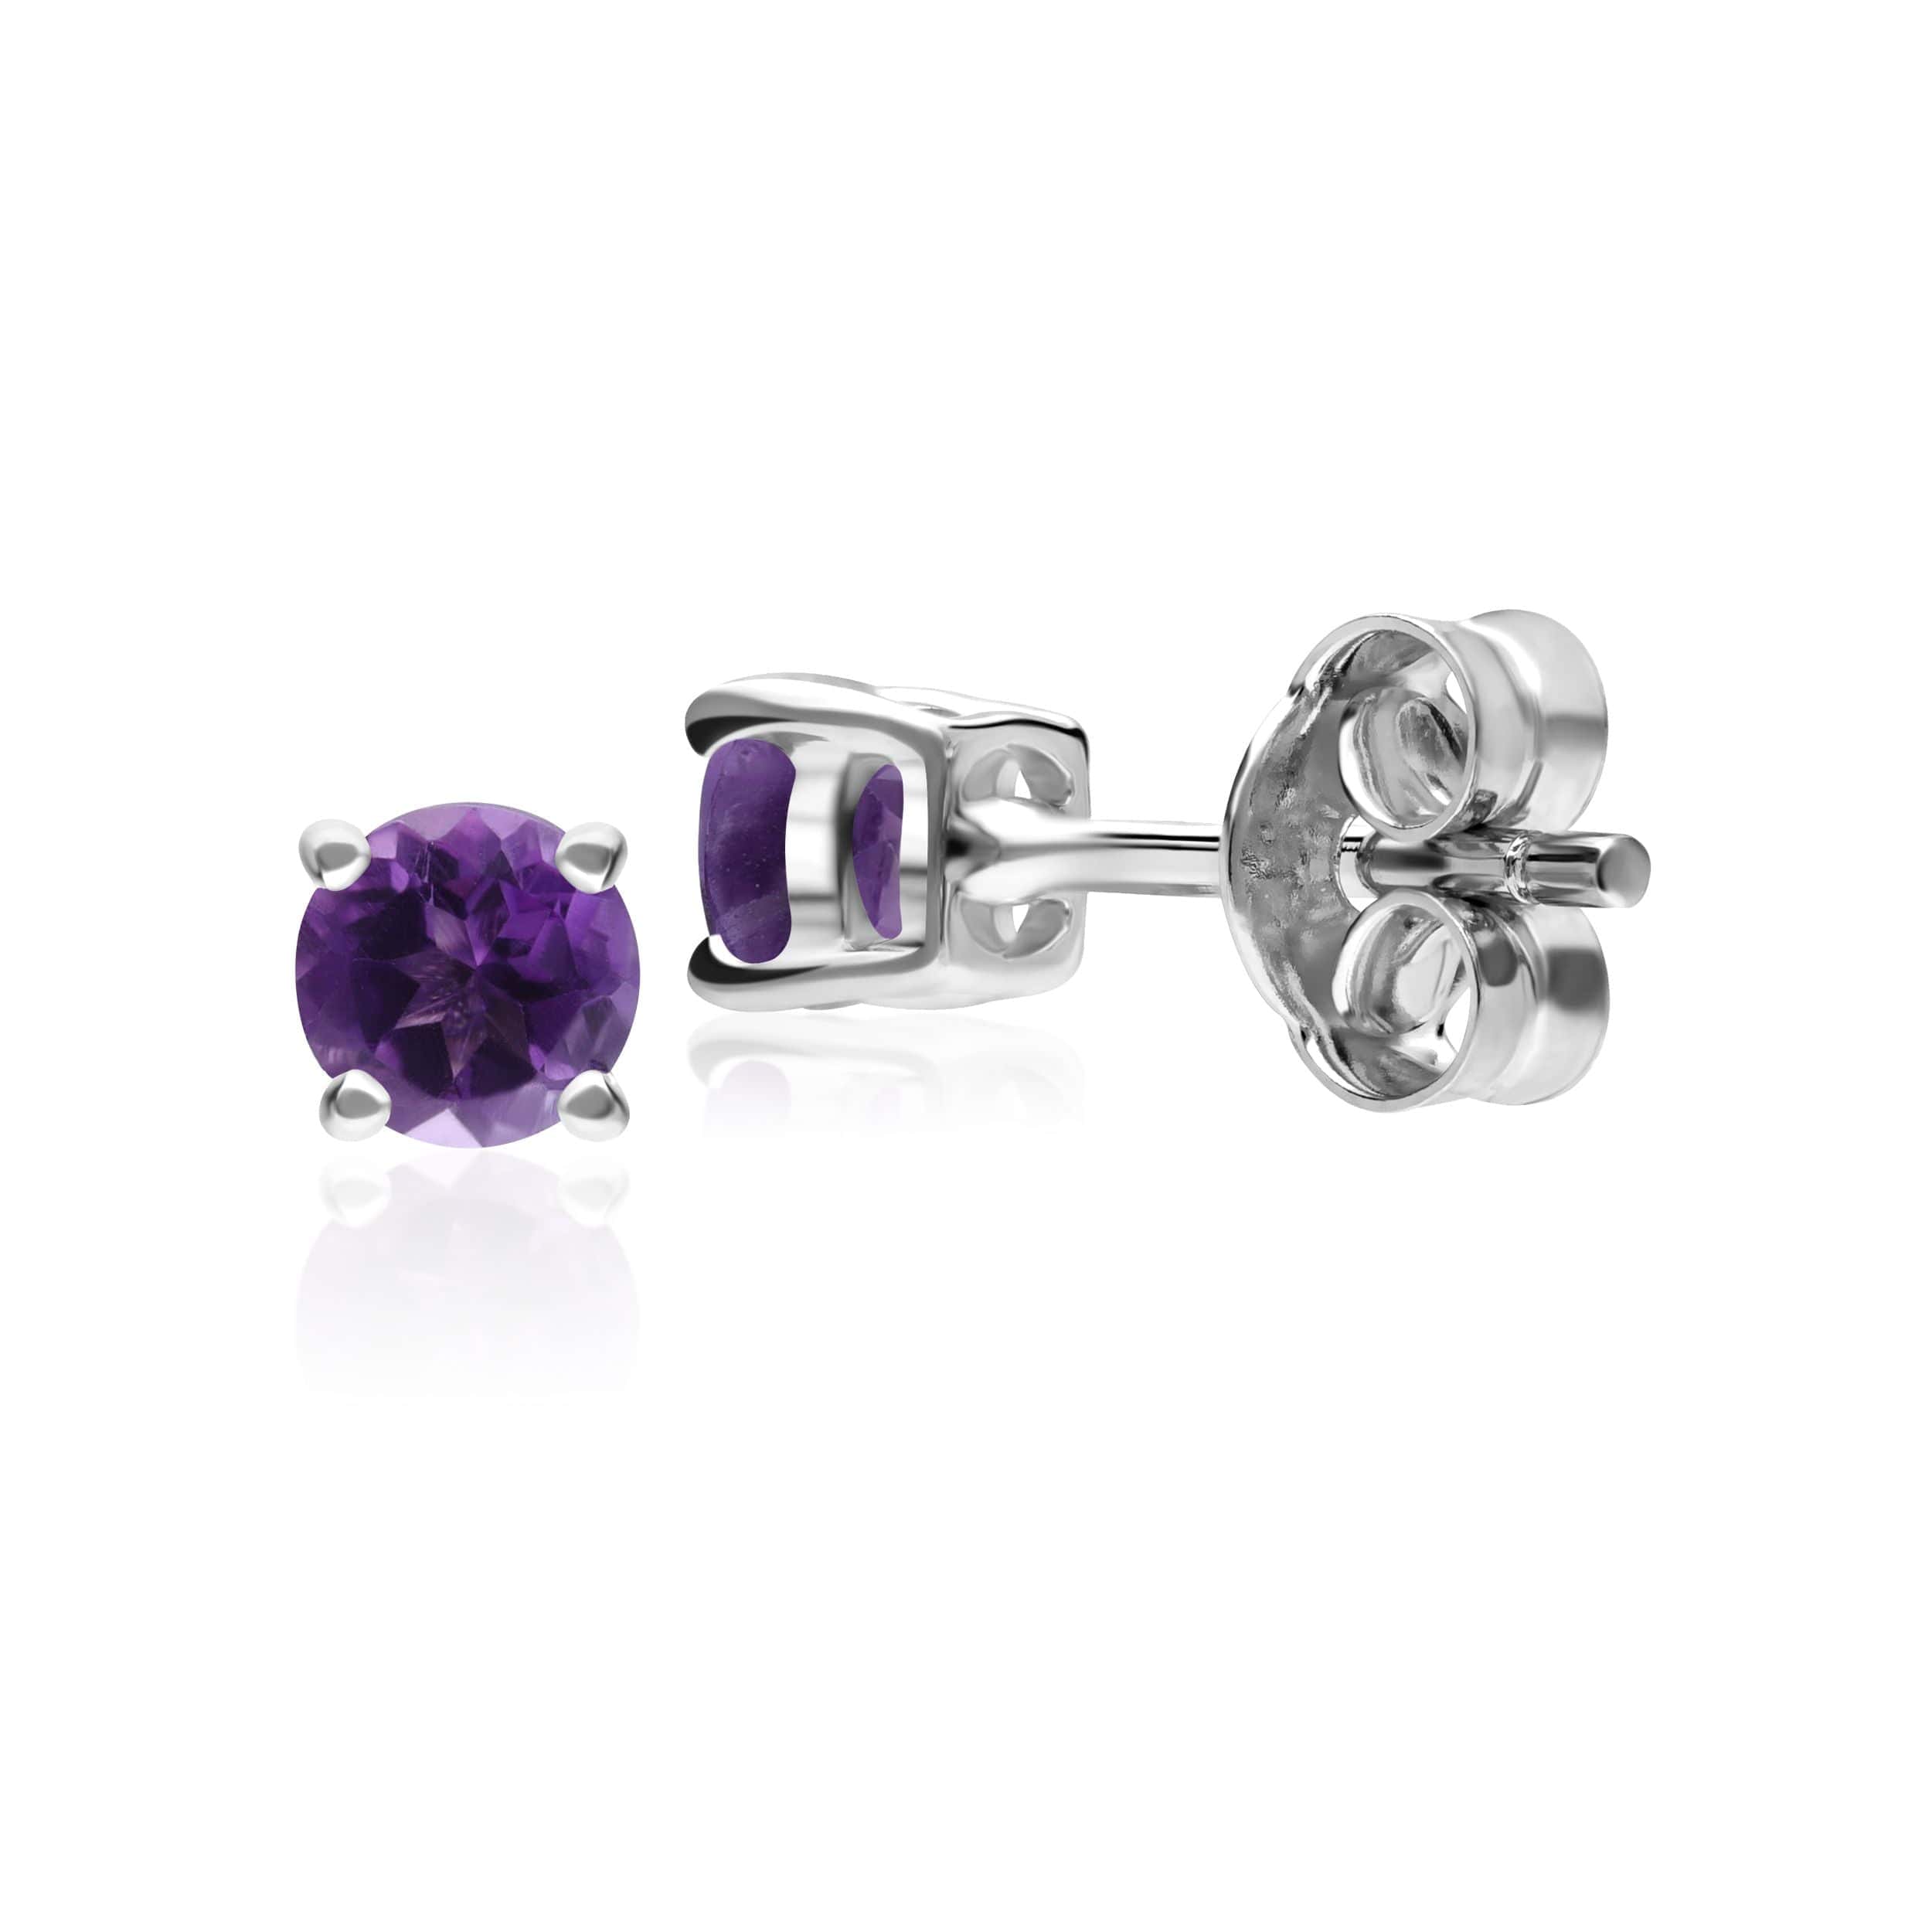 270E025102925 Classic Round Amethyst 6 Claw Set Stud Earrings in 925 Sterling Silver 2